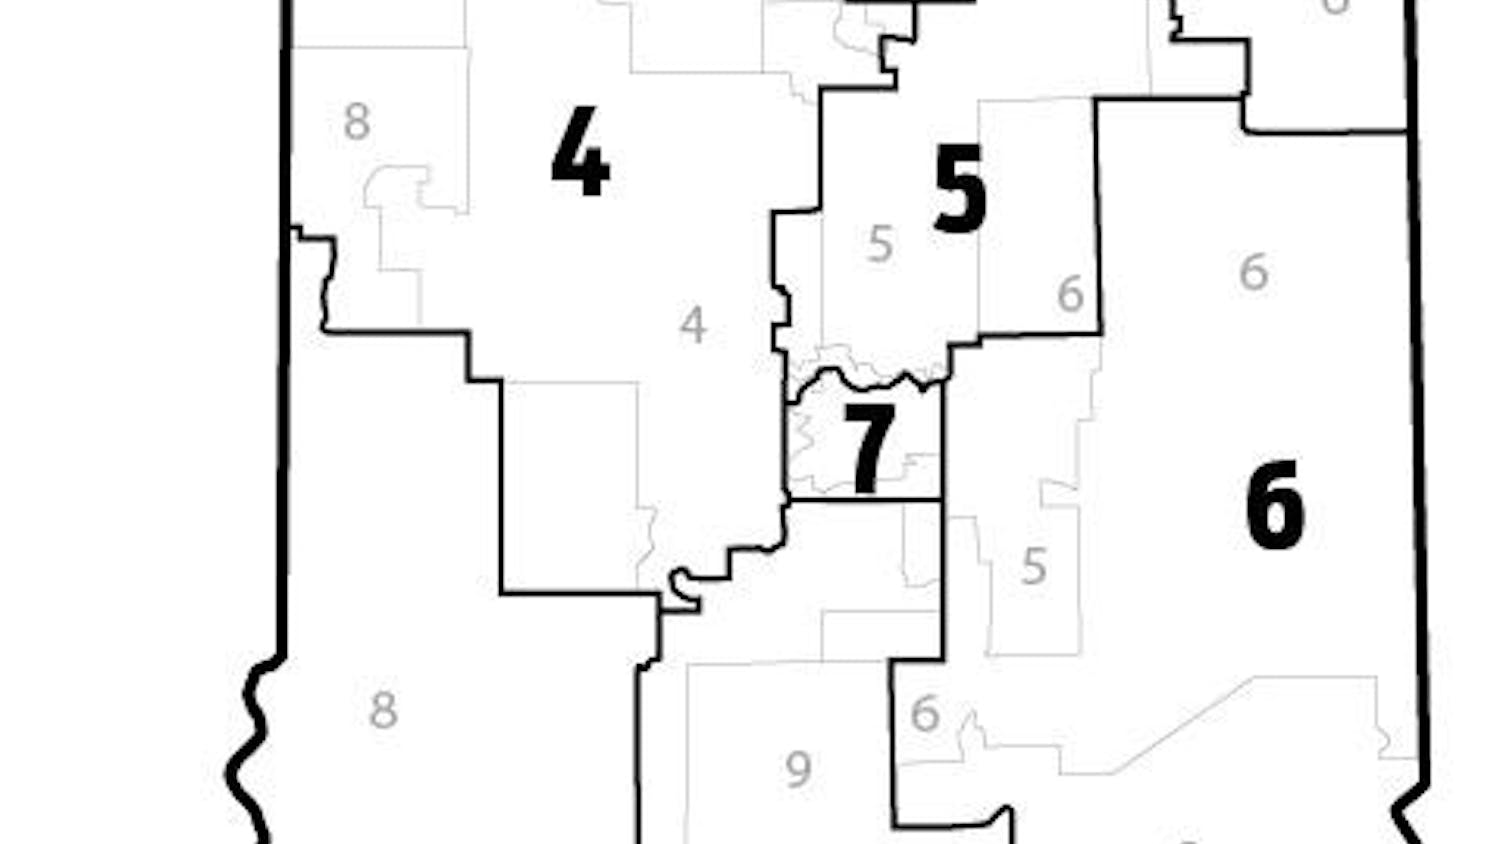 Indiana's new congressional districts